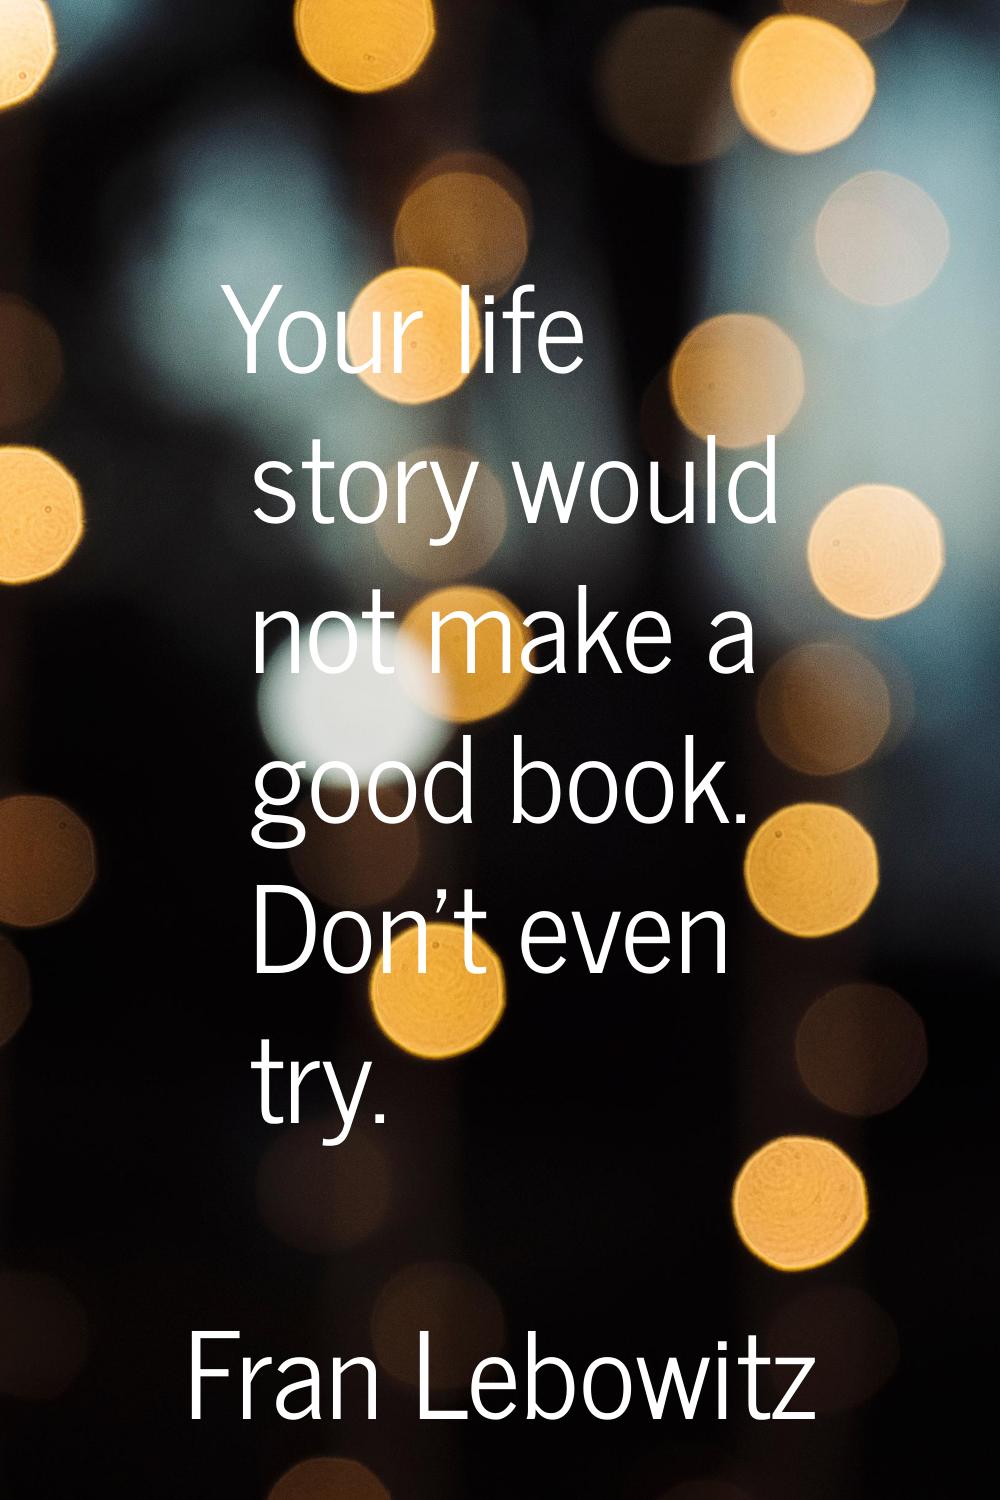 Your life story would not make a good book. Don't even try.